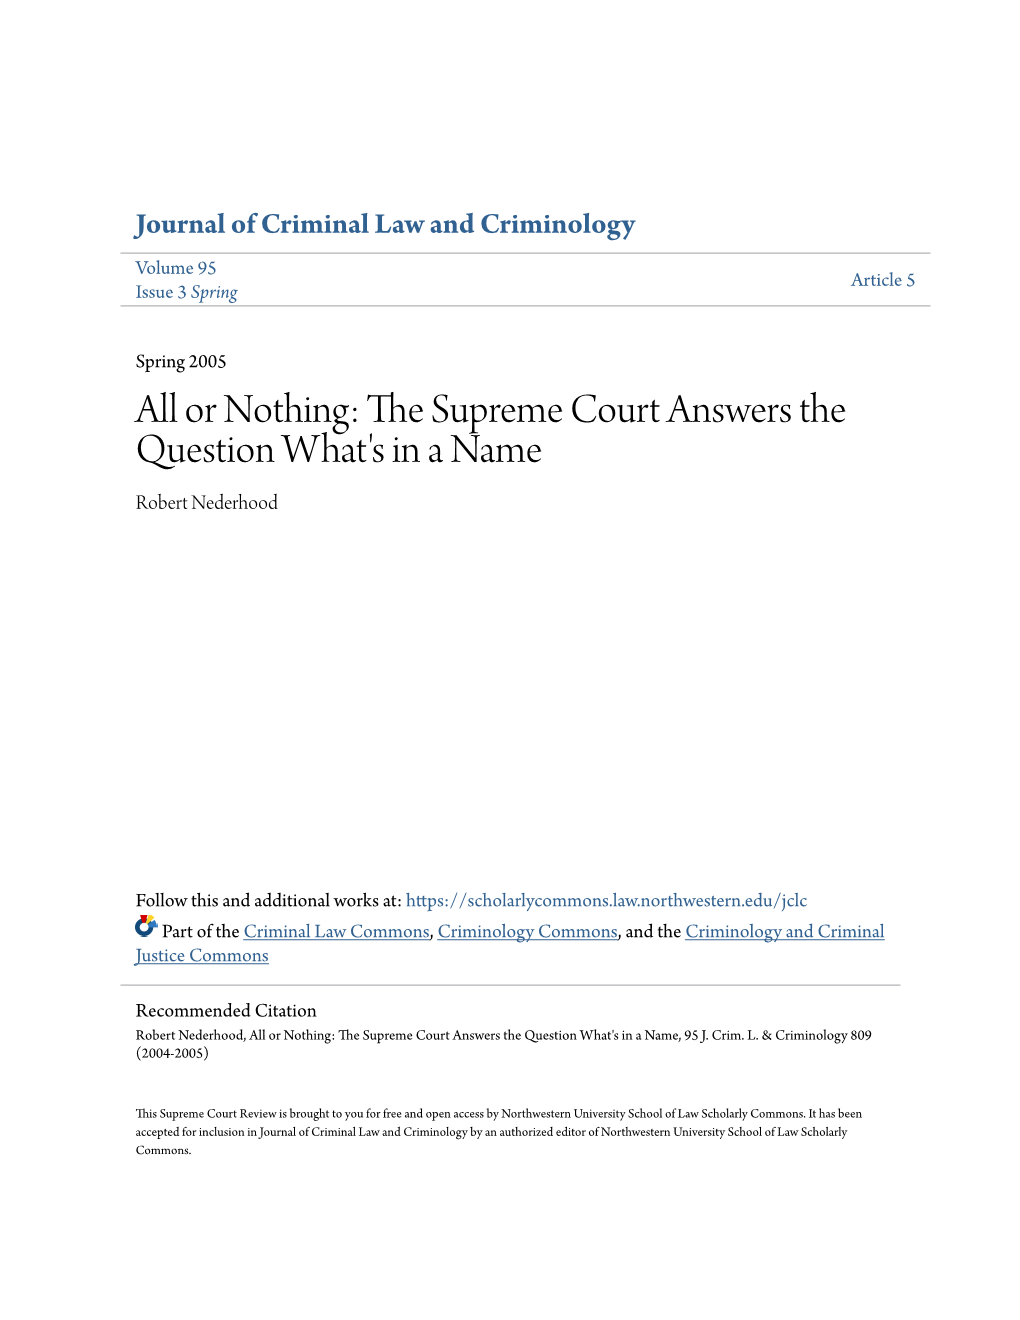 All Or Nothing: the Supreme Court Answers the Question What's in A